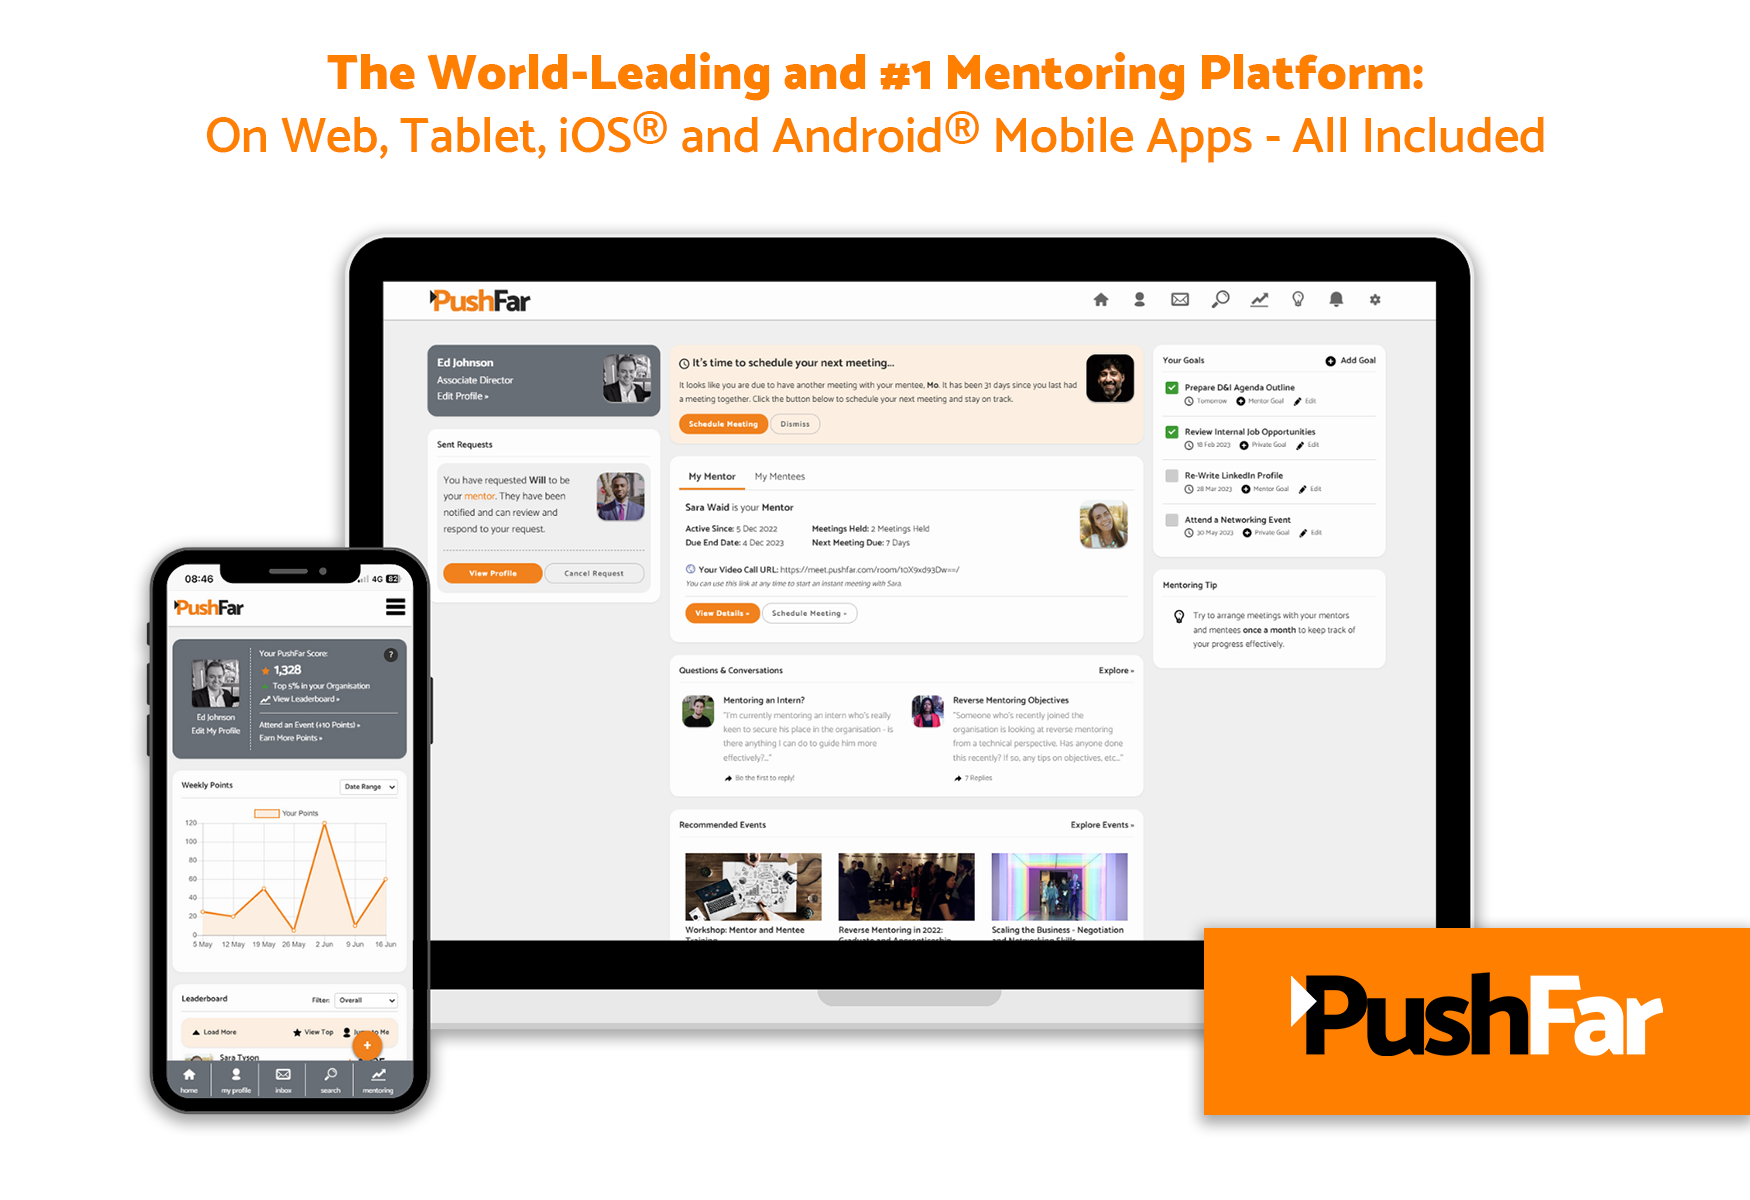 PushFar's World-Leading #1 Mentoring Platform - Across All Devices, Including Web, Tablet, Mobile and Mobile Apps